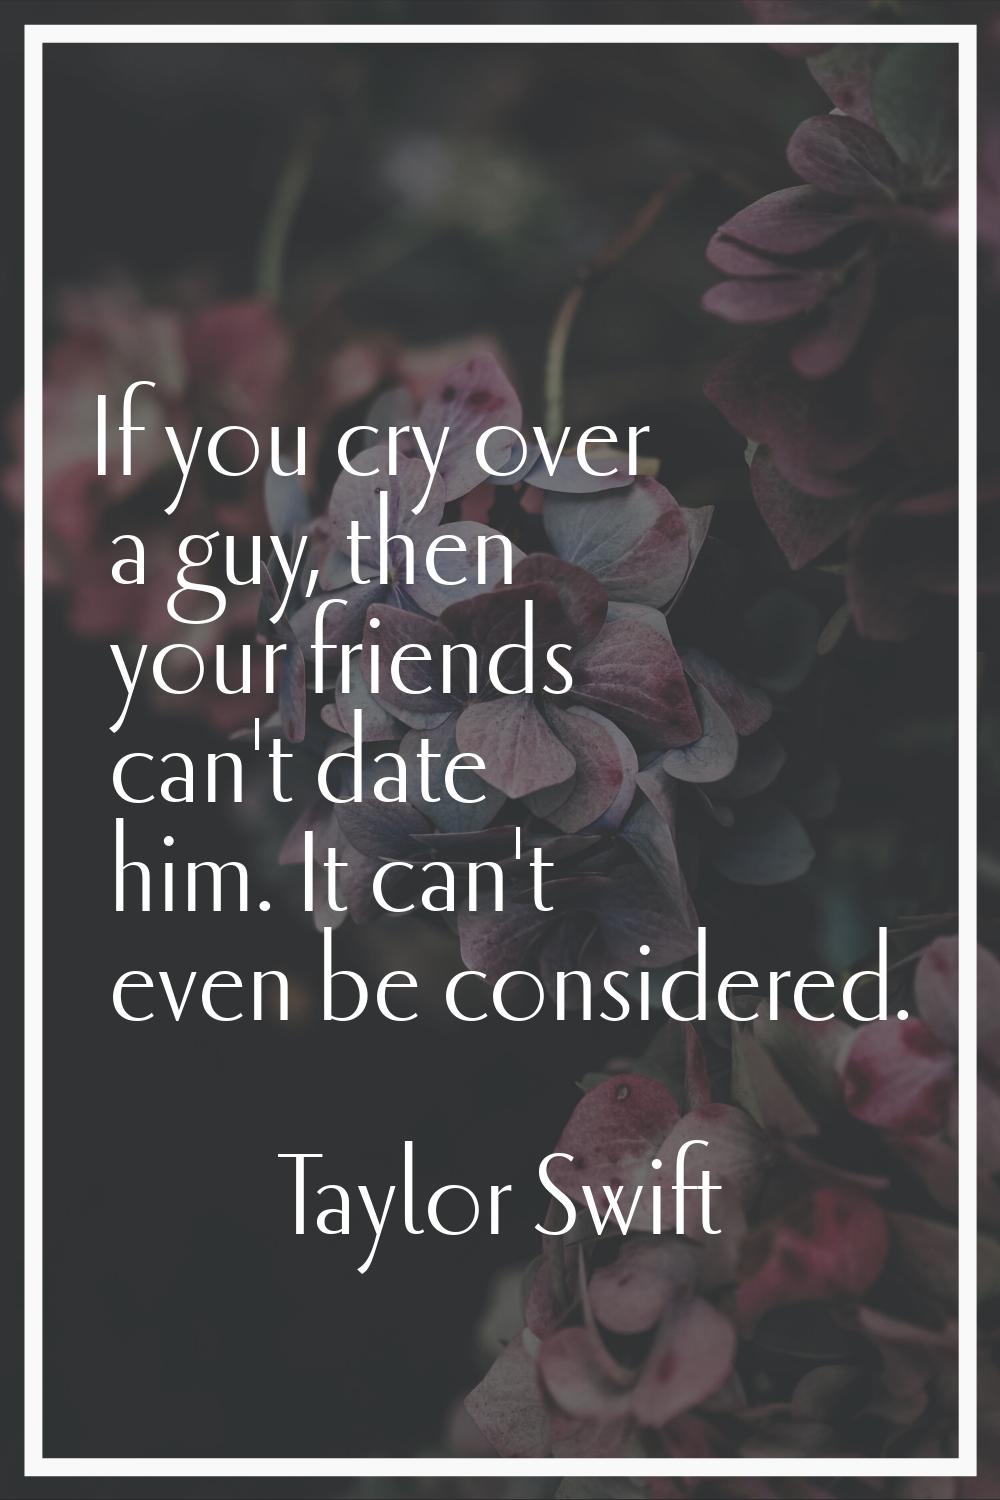 If you cry over a guy, then your friends can't date him. It can't even be considered.